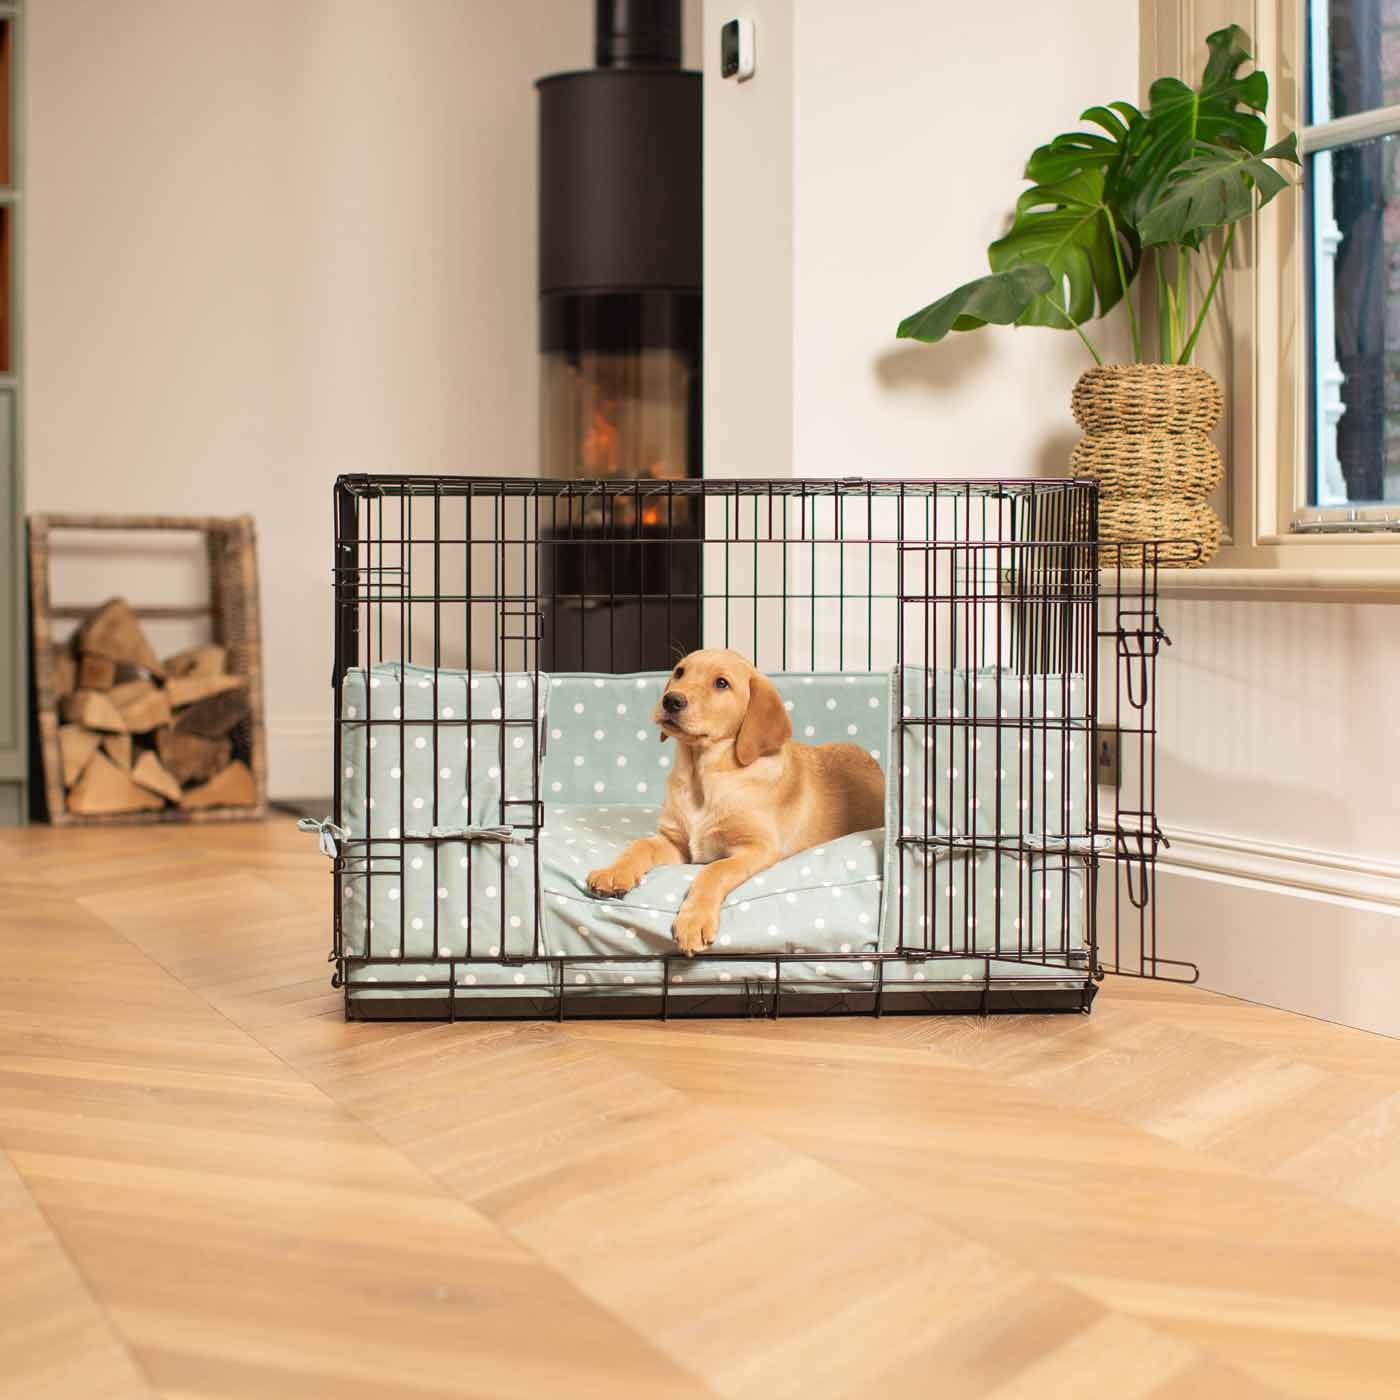 Luxury Dog Crate Bumper, Duck Egg Spot Crate Bumper Cover The Perfect Dog Crate Accessory, Available To Personalise Now at Lords & Labradors